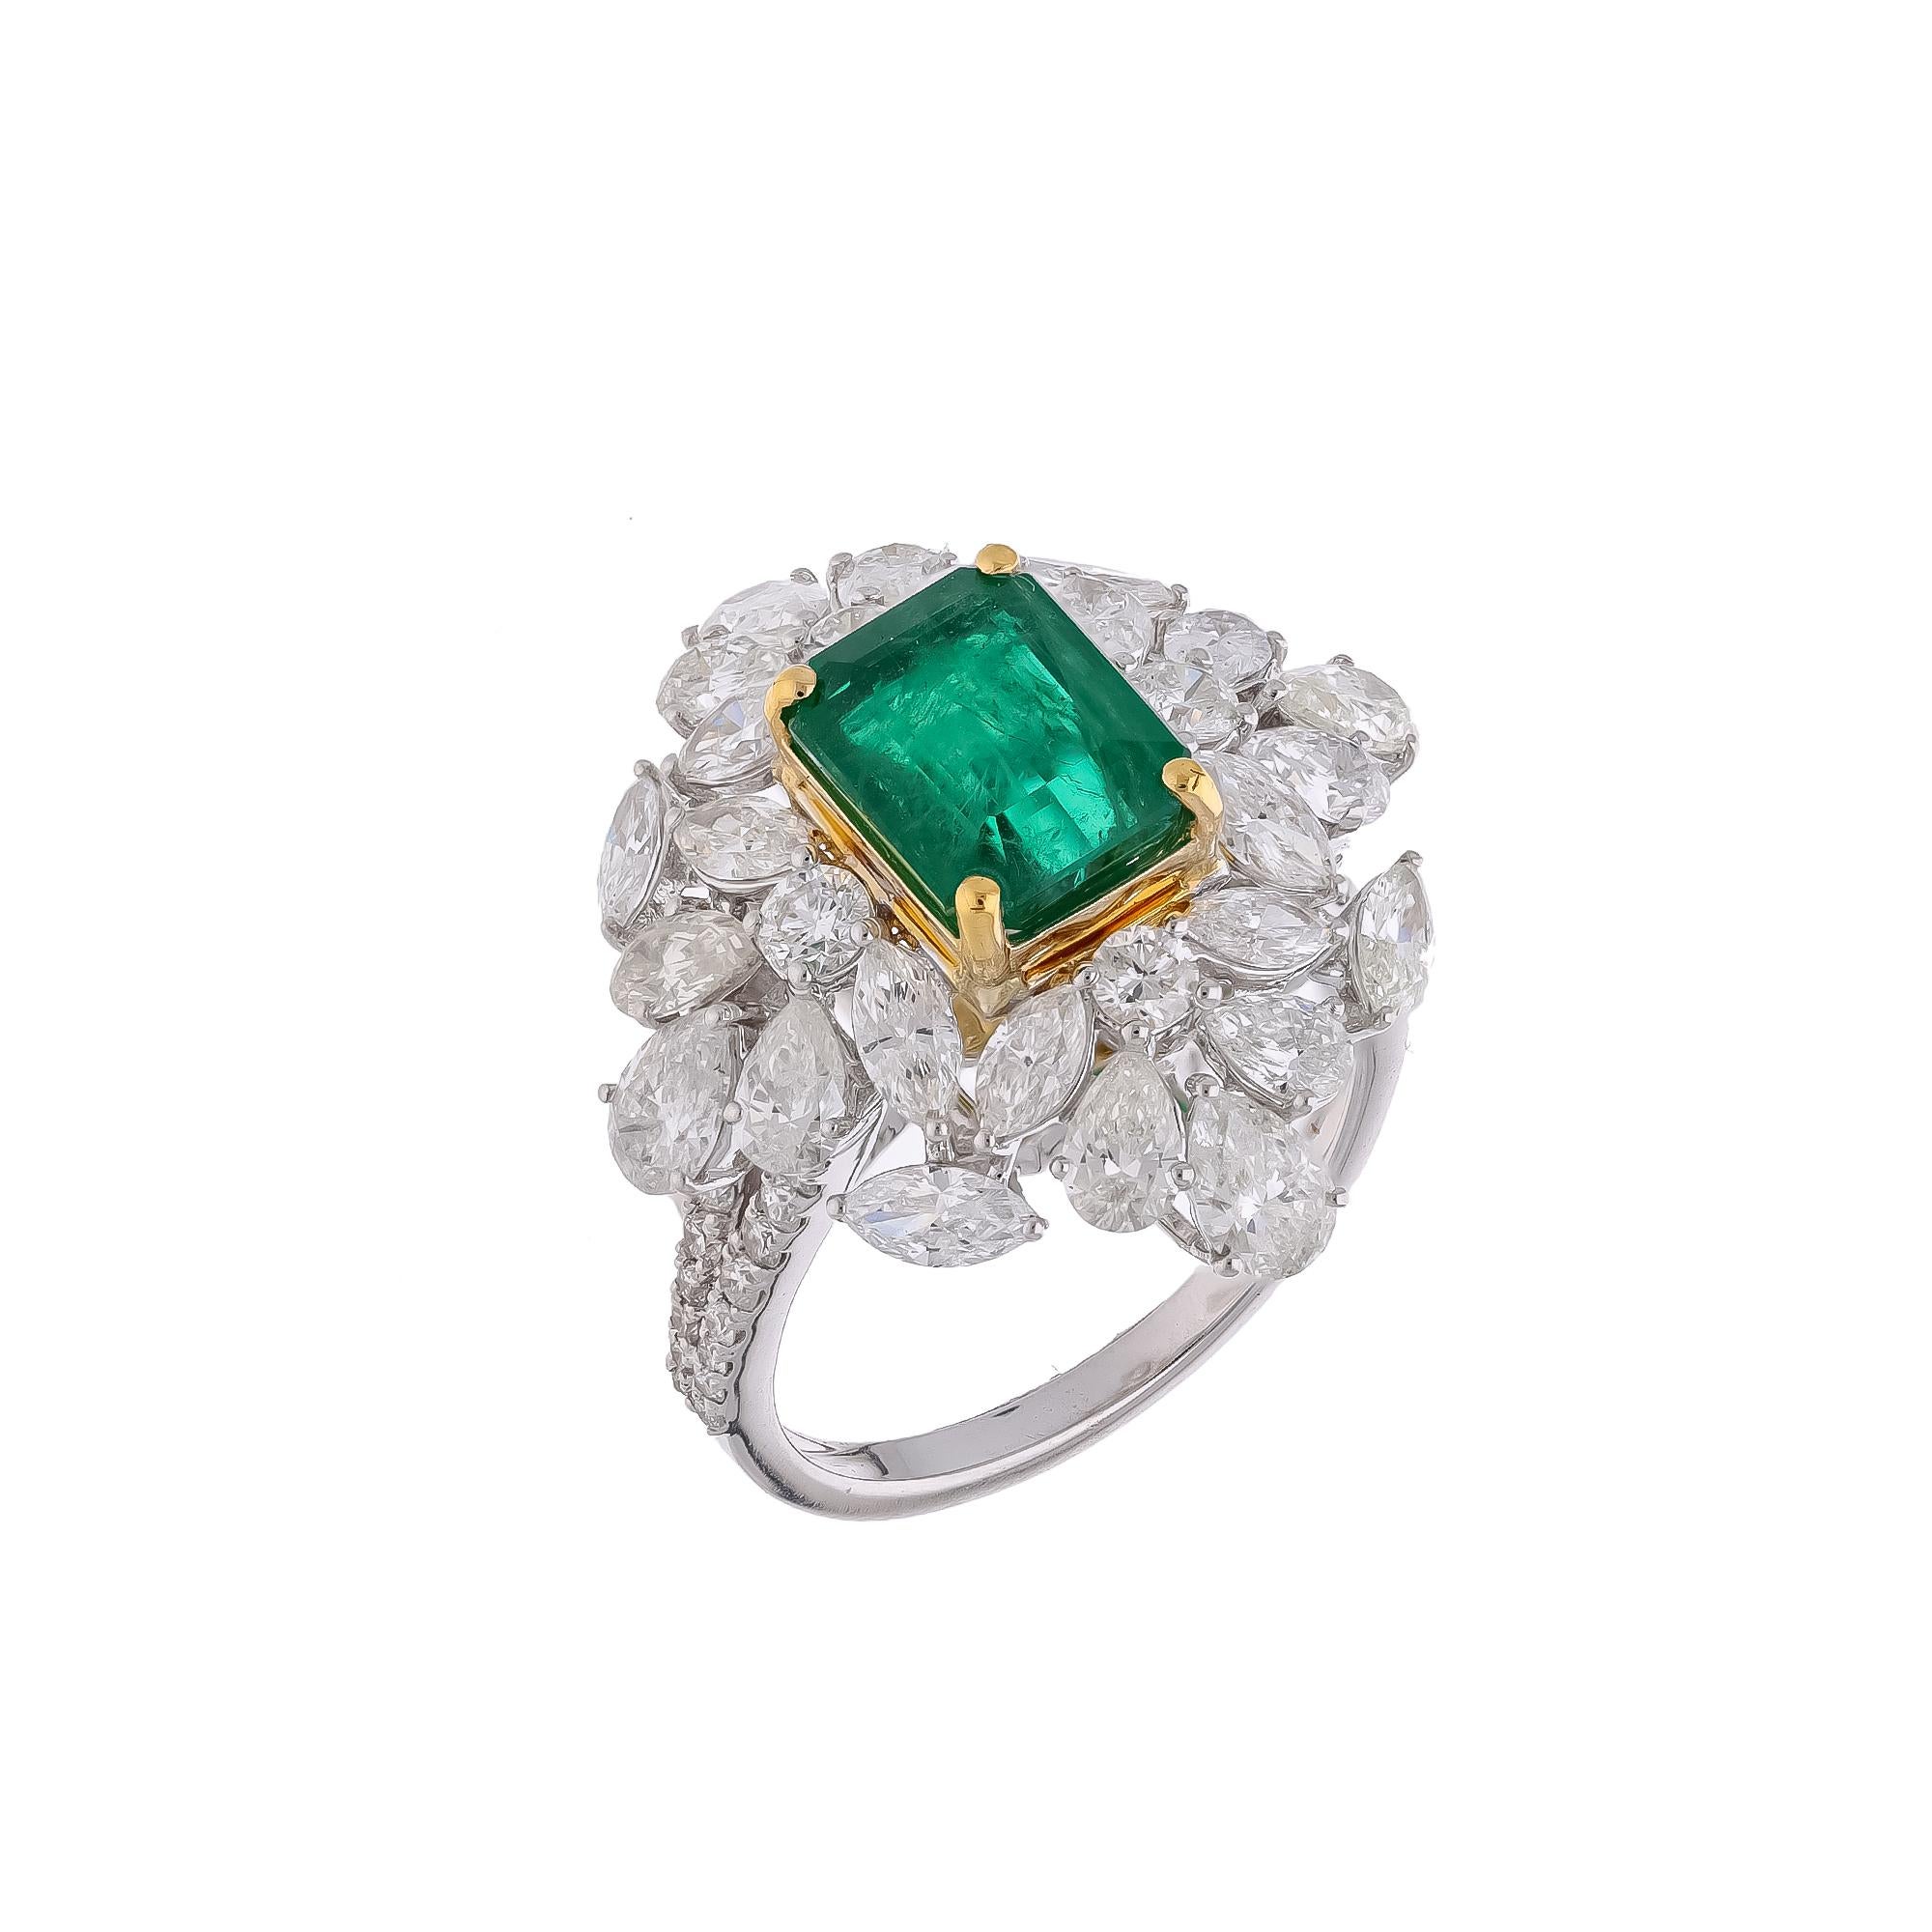 This is a wonderful natural Zambian Emerald ring. it has very high quality emeralds and very good quality diamonds ( vsi ) clarity and G Colour .

Emerald: 2.54 carats
diamonds : 3.77 carats
gold : 7.44 gms



Its very hard to capture the true color